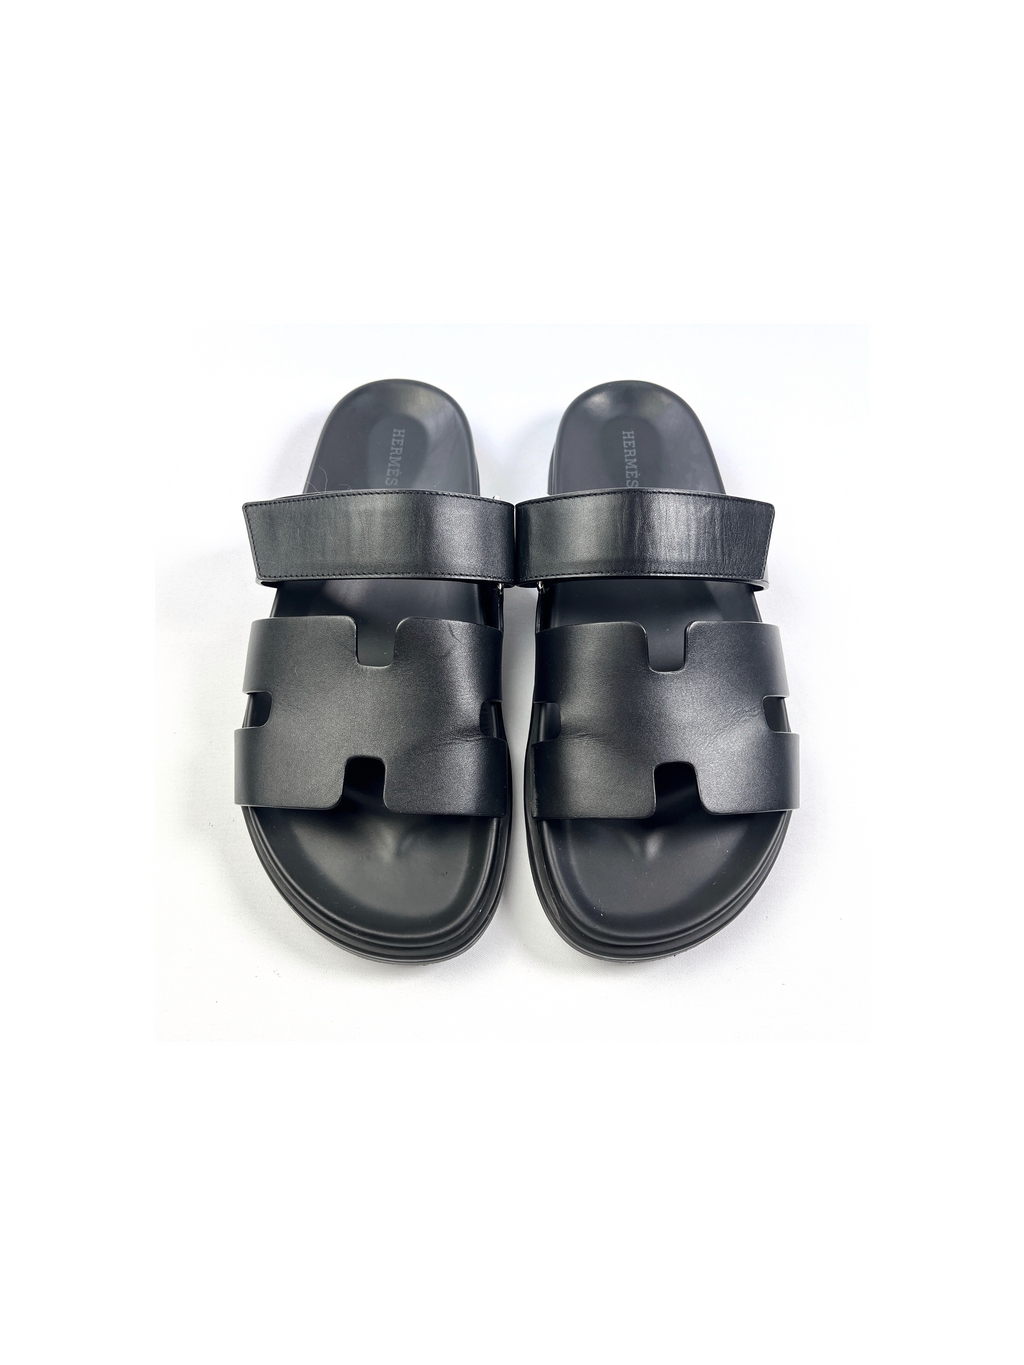 HERMES - CHYPRE LEATHER SANDALS IN BLACK (MENS) - SZ 41